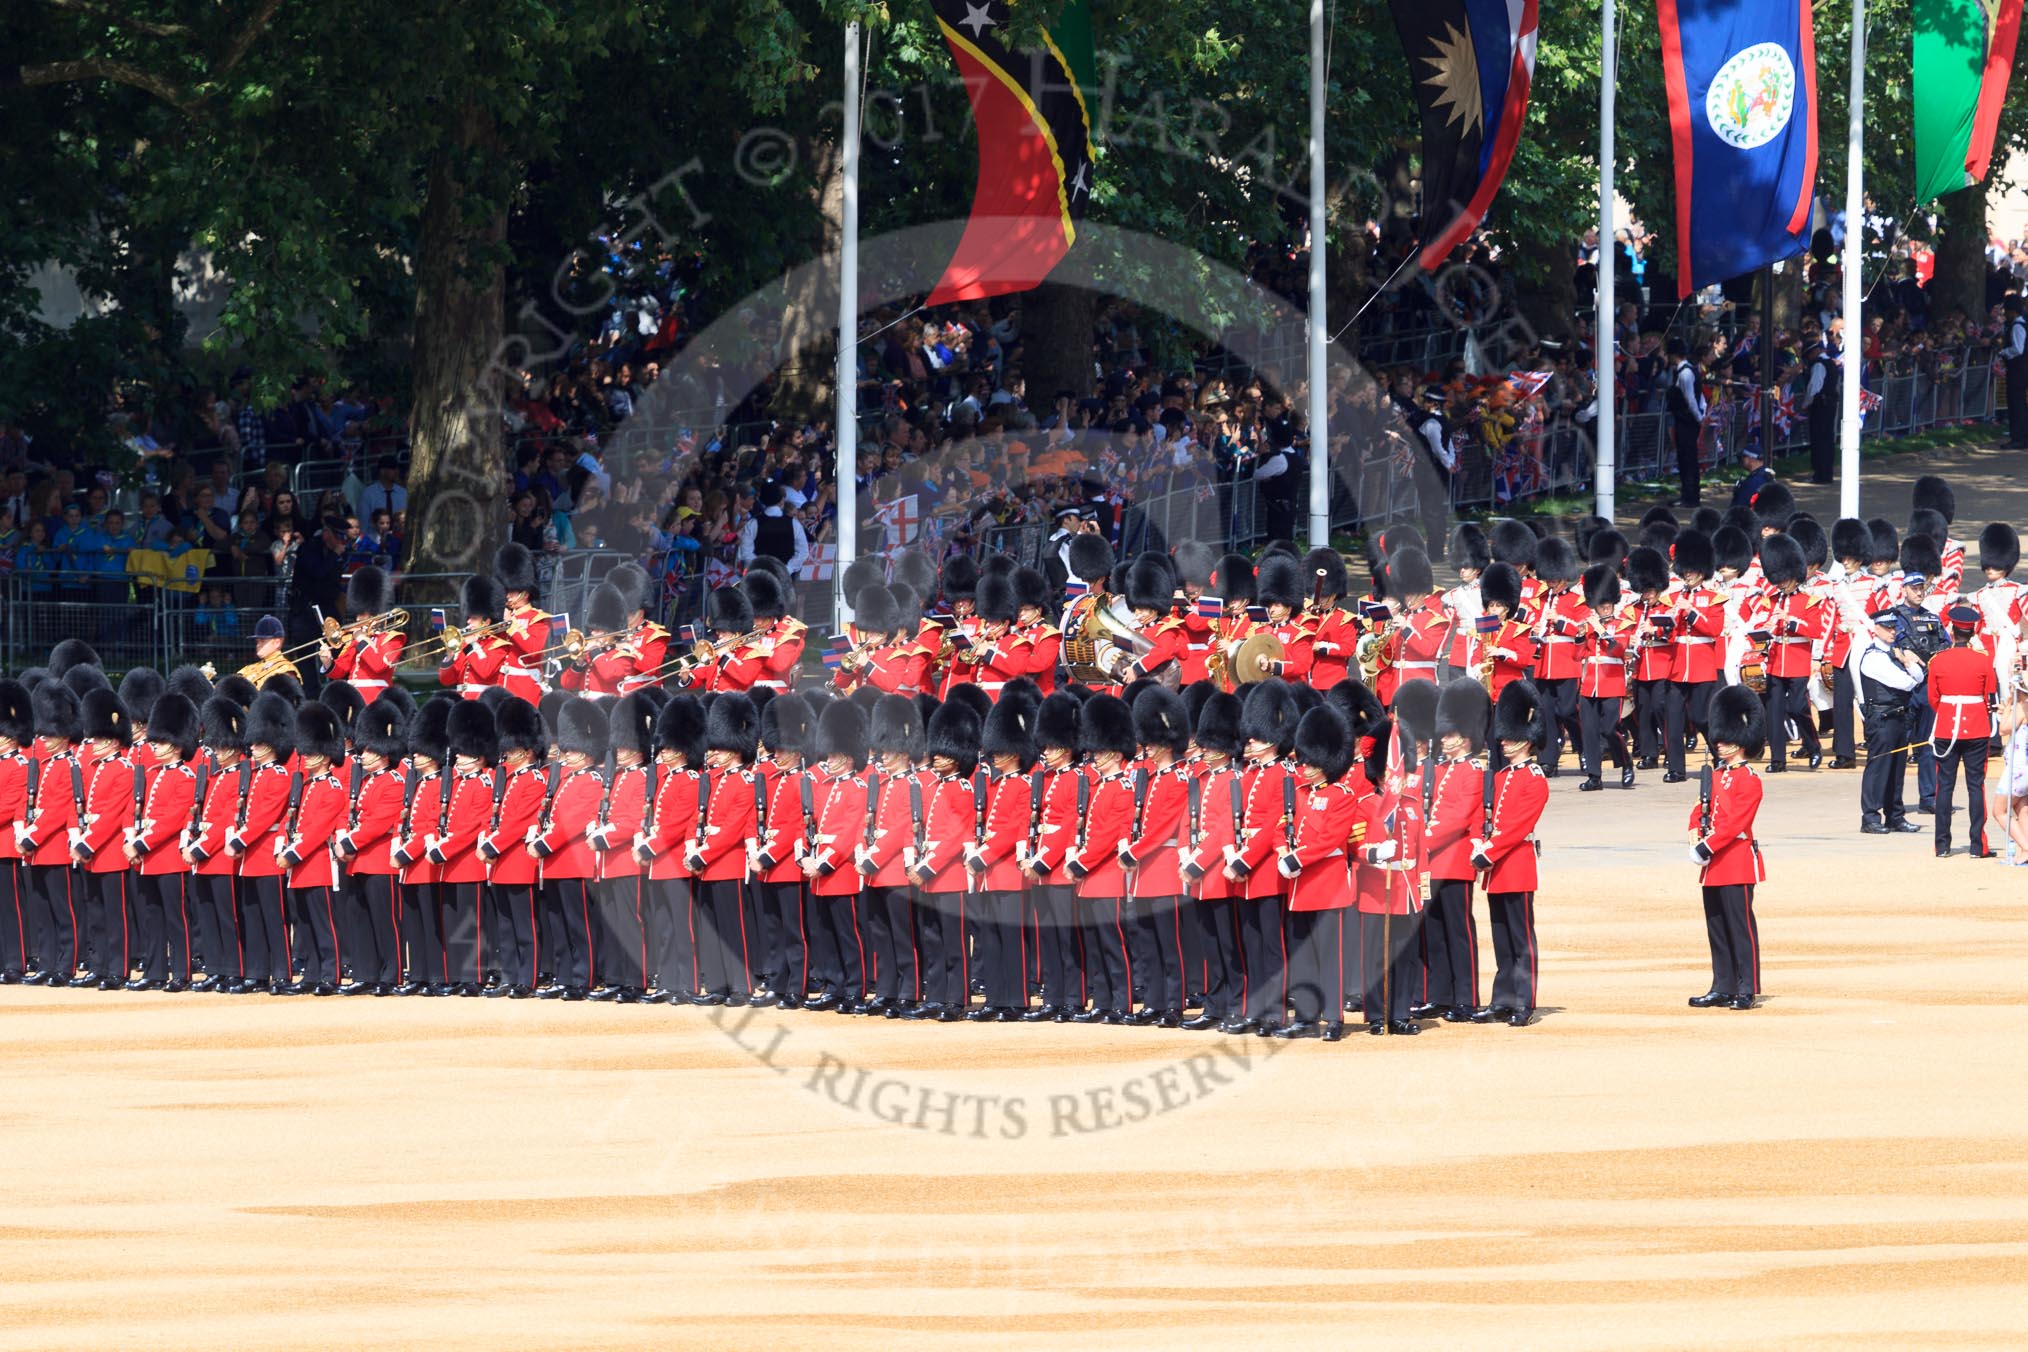 The Band of the Coldstream Guards marching behind Number Five Guard, Nijmegen Company, Grenadier Guards during Trooping the Colour 2018, The Queen's Birthday Parade at Horse Guards Parade, Westminster, London, 9 June 2018, 10:30.